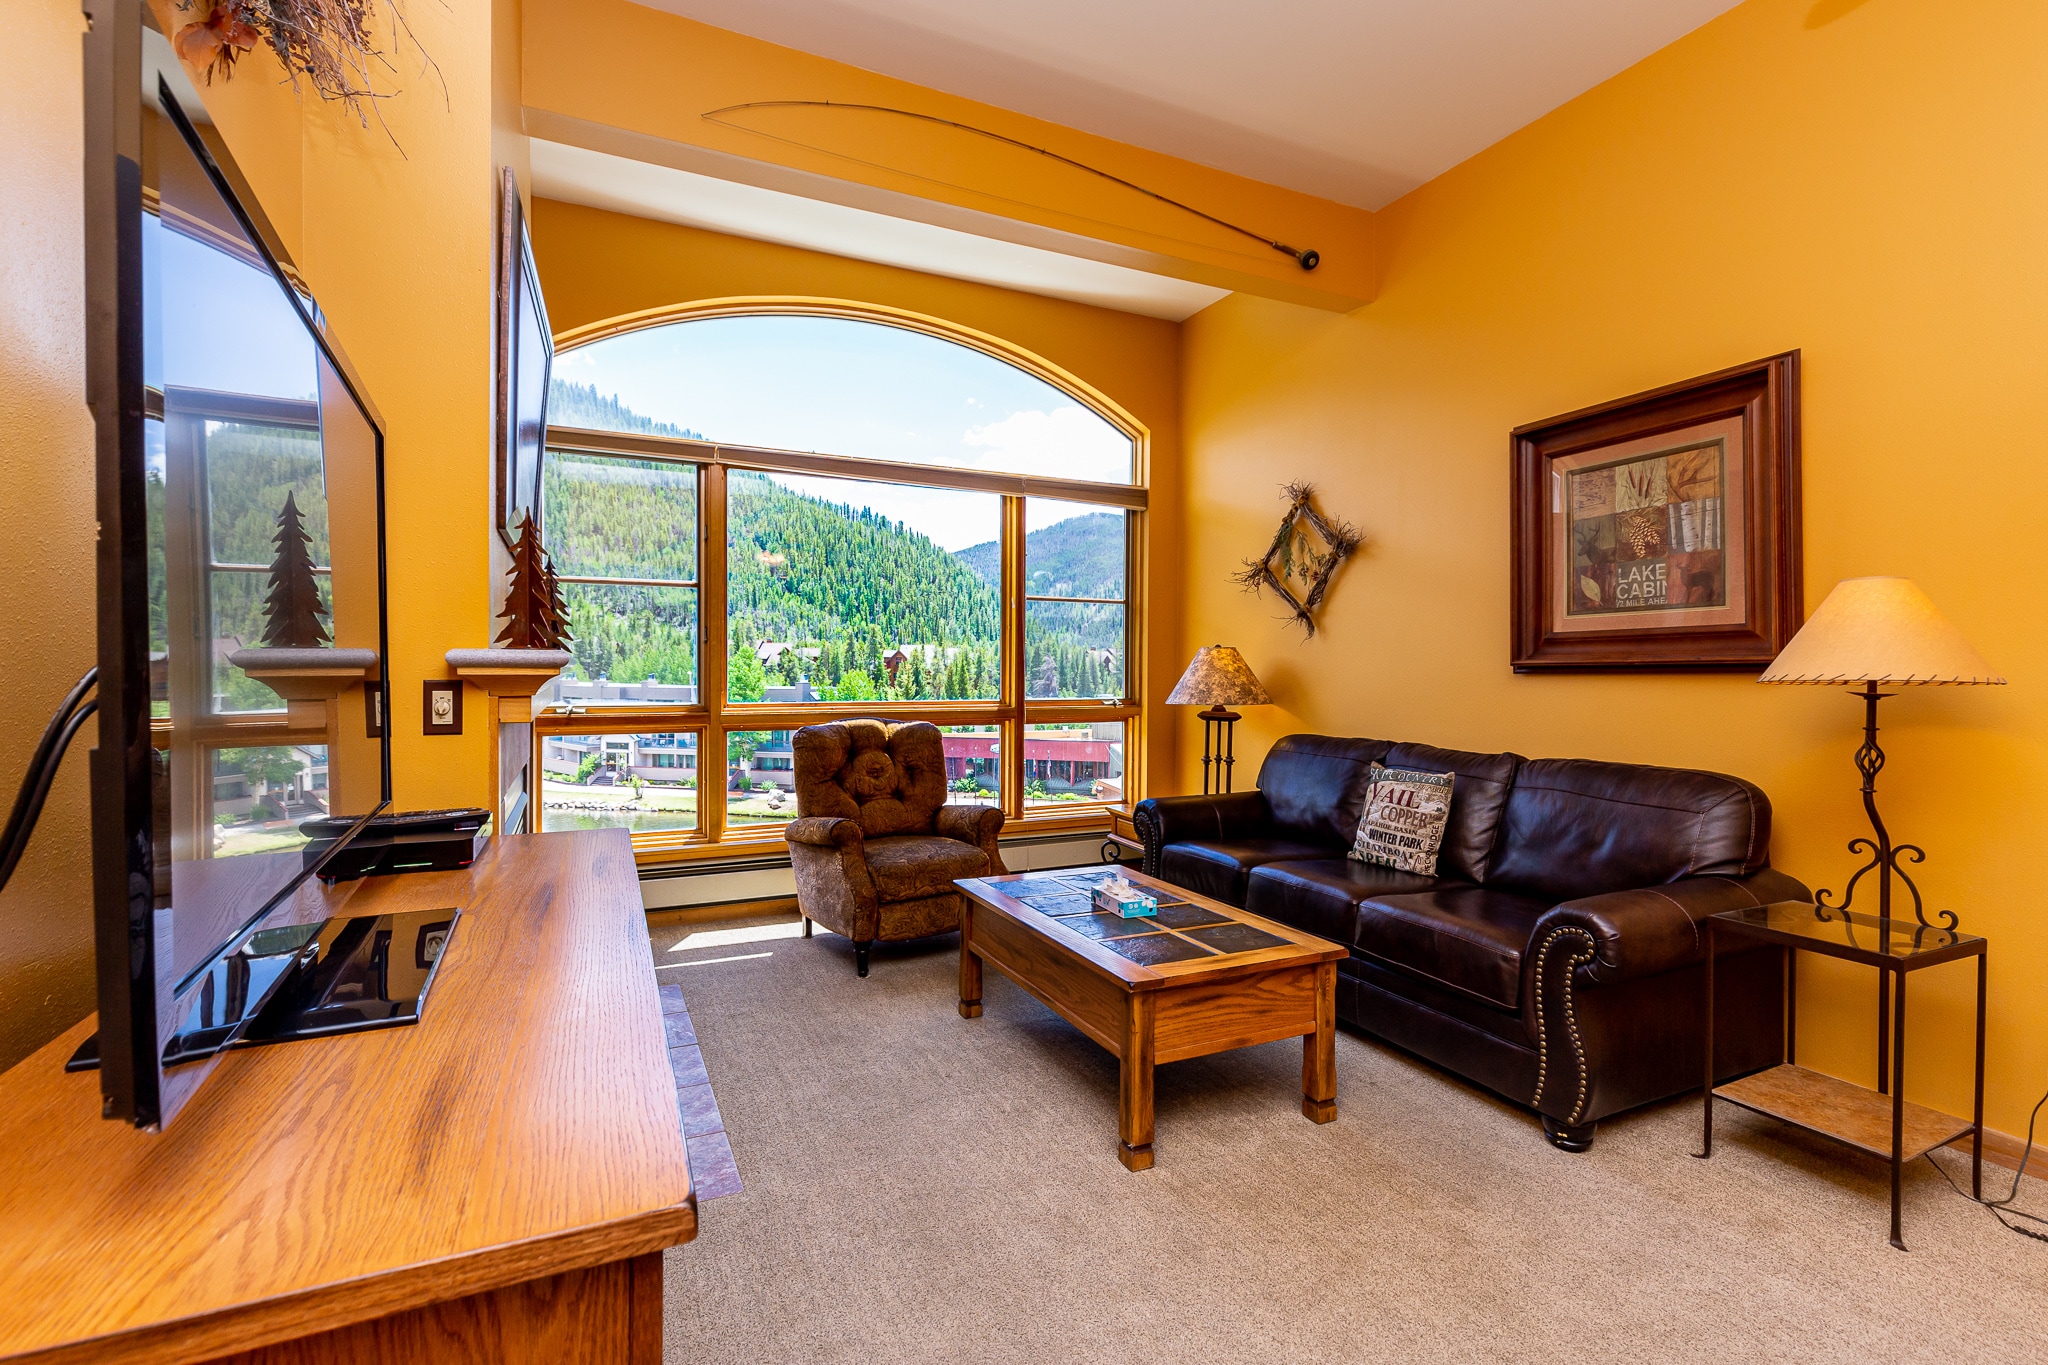 The living area features a gas fireplace, flat screen TV, and spectacular views.